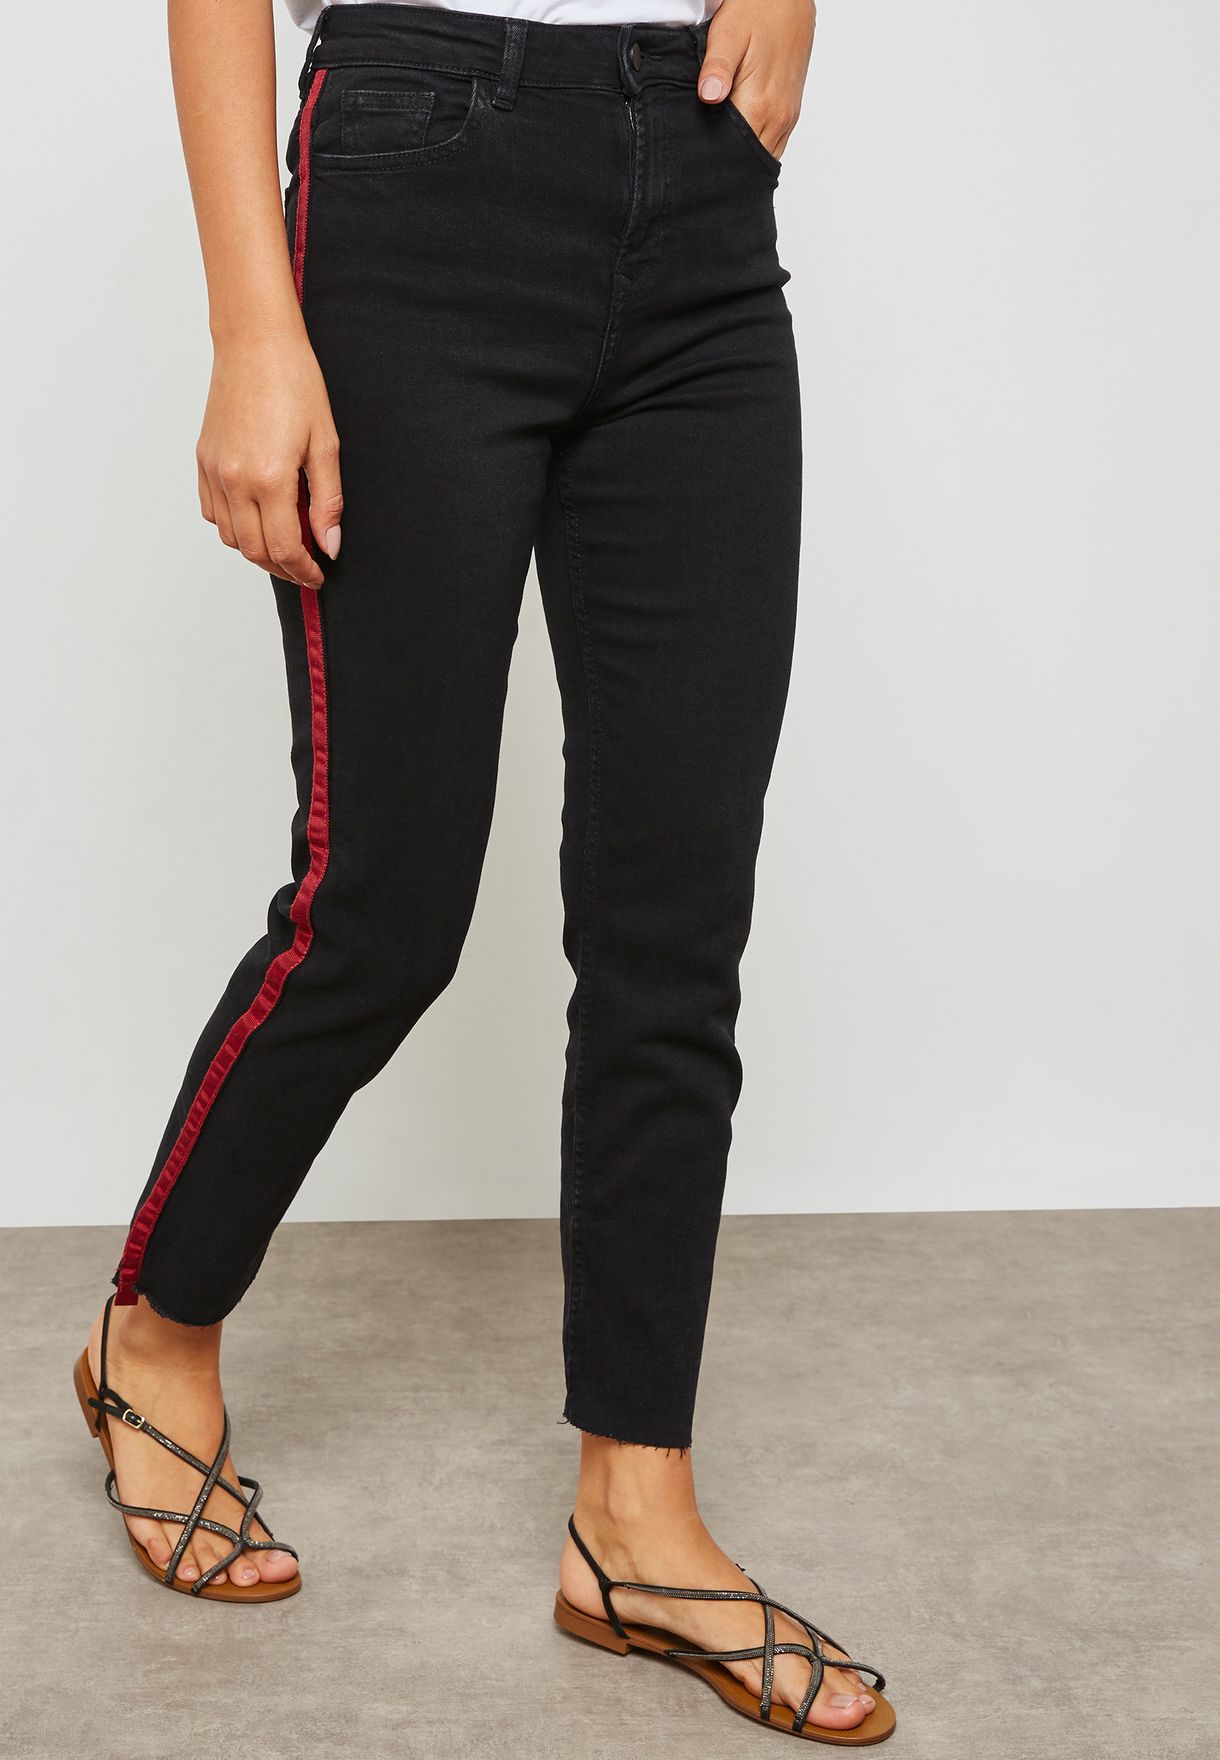 womens jeans with red side stripe